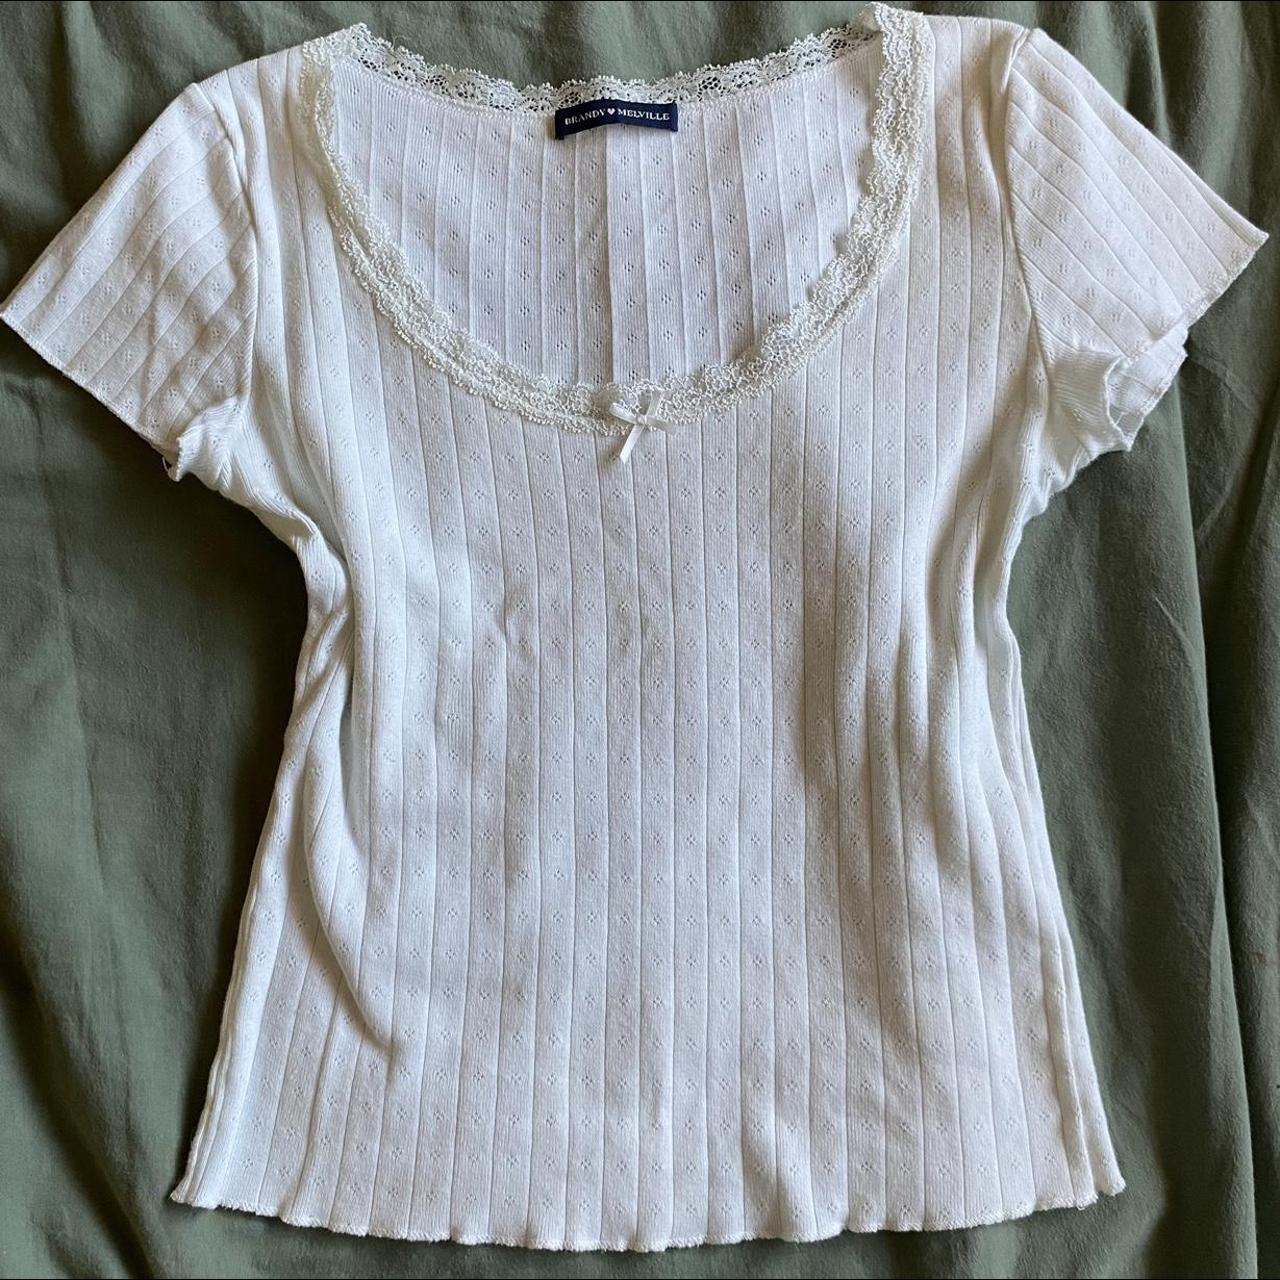 brandy melville mckenna bow lace top, Women's Fashion, Tops